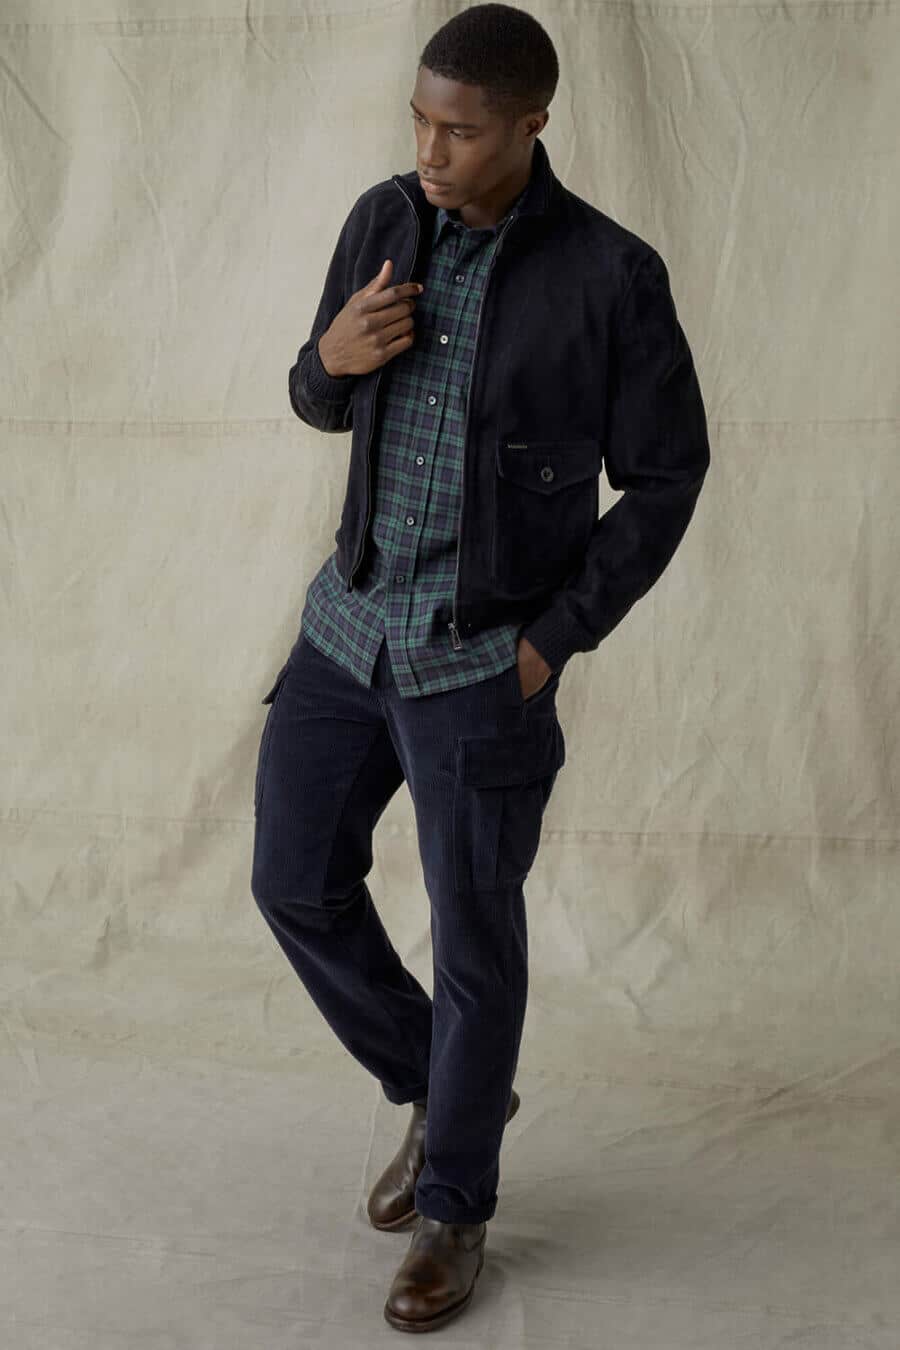 Men's flannel shirt outfit with cargo pants